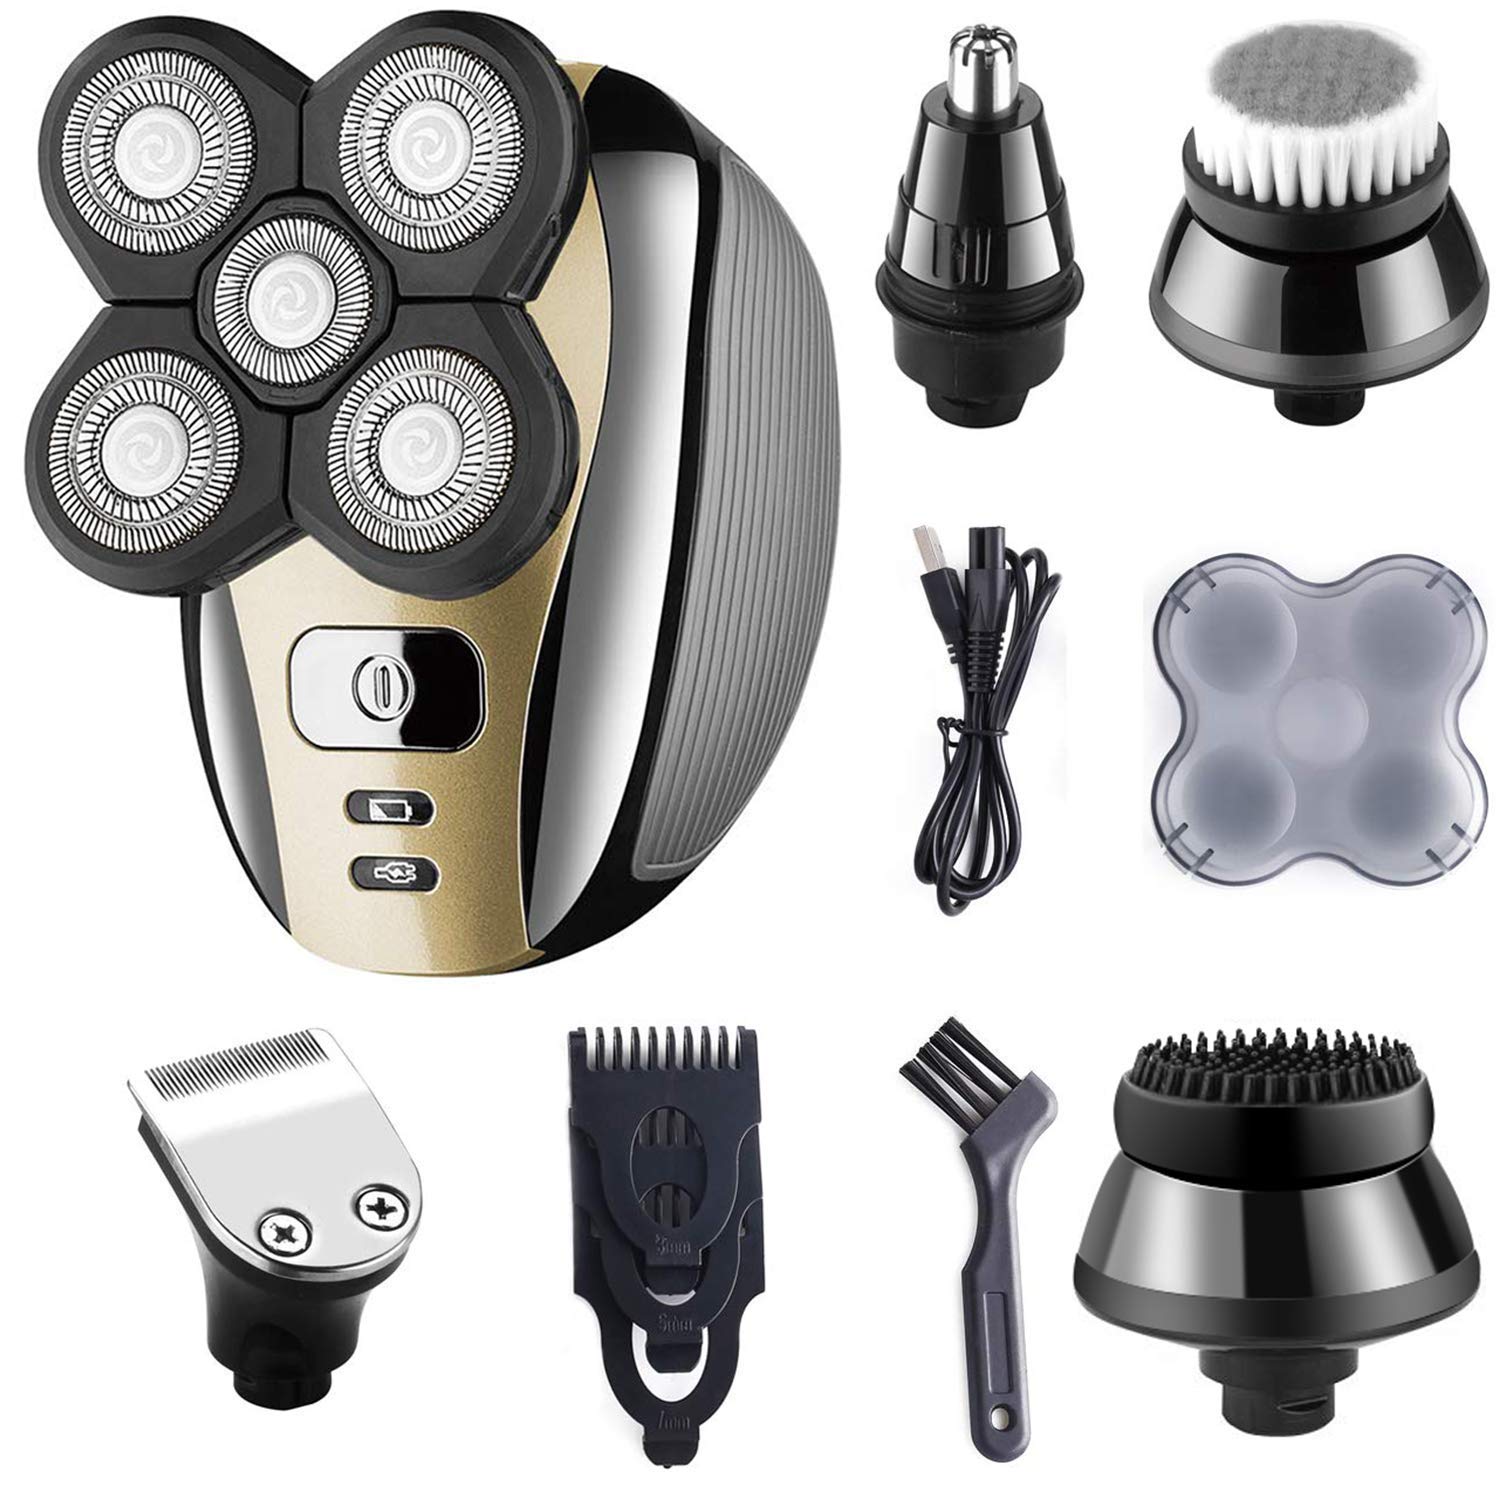 Dreamme Electric Shaver for Men 5-in-1 Grooming Kit for Men: Five-Headed Beard Electric Razors,Nose Hair Trimmer,Head Shavers for Bald Men, Cordless a